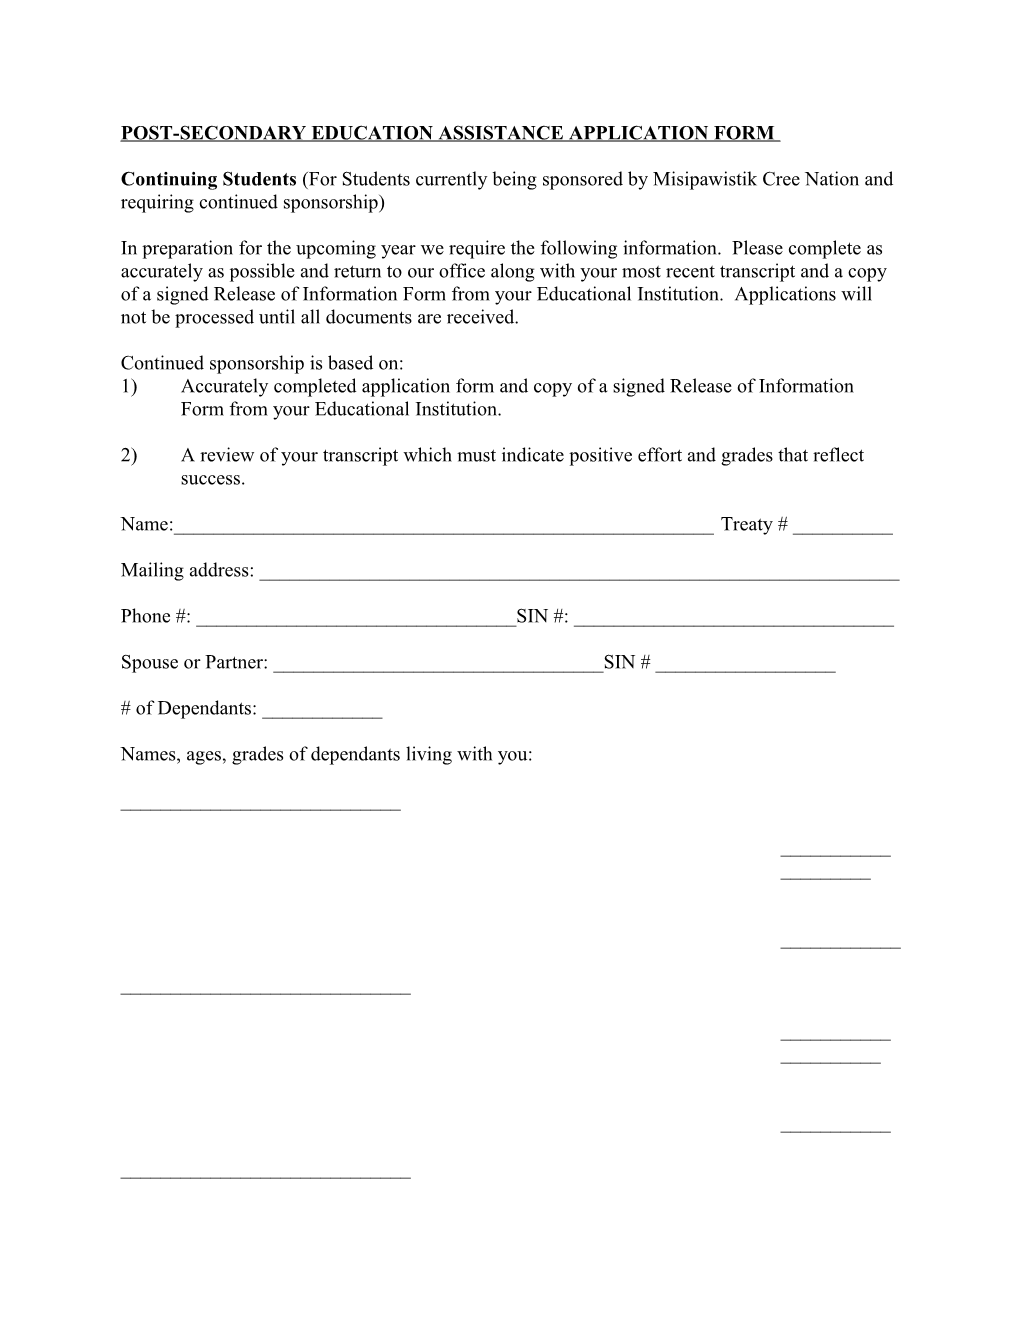 Post-Secondary Education Assistance Application Form